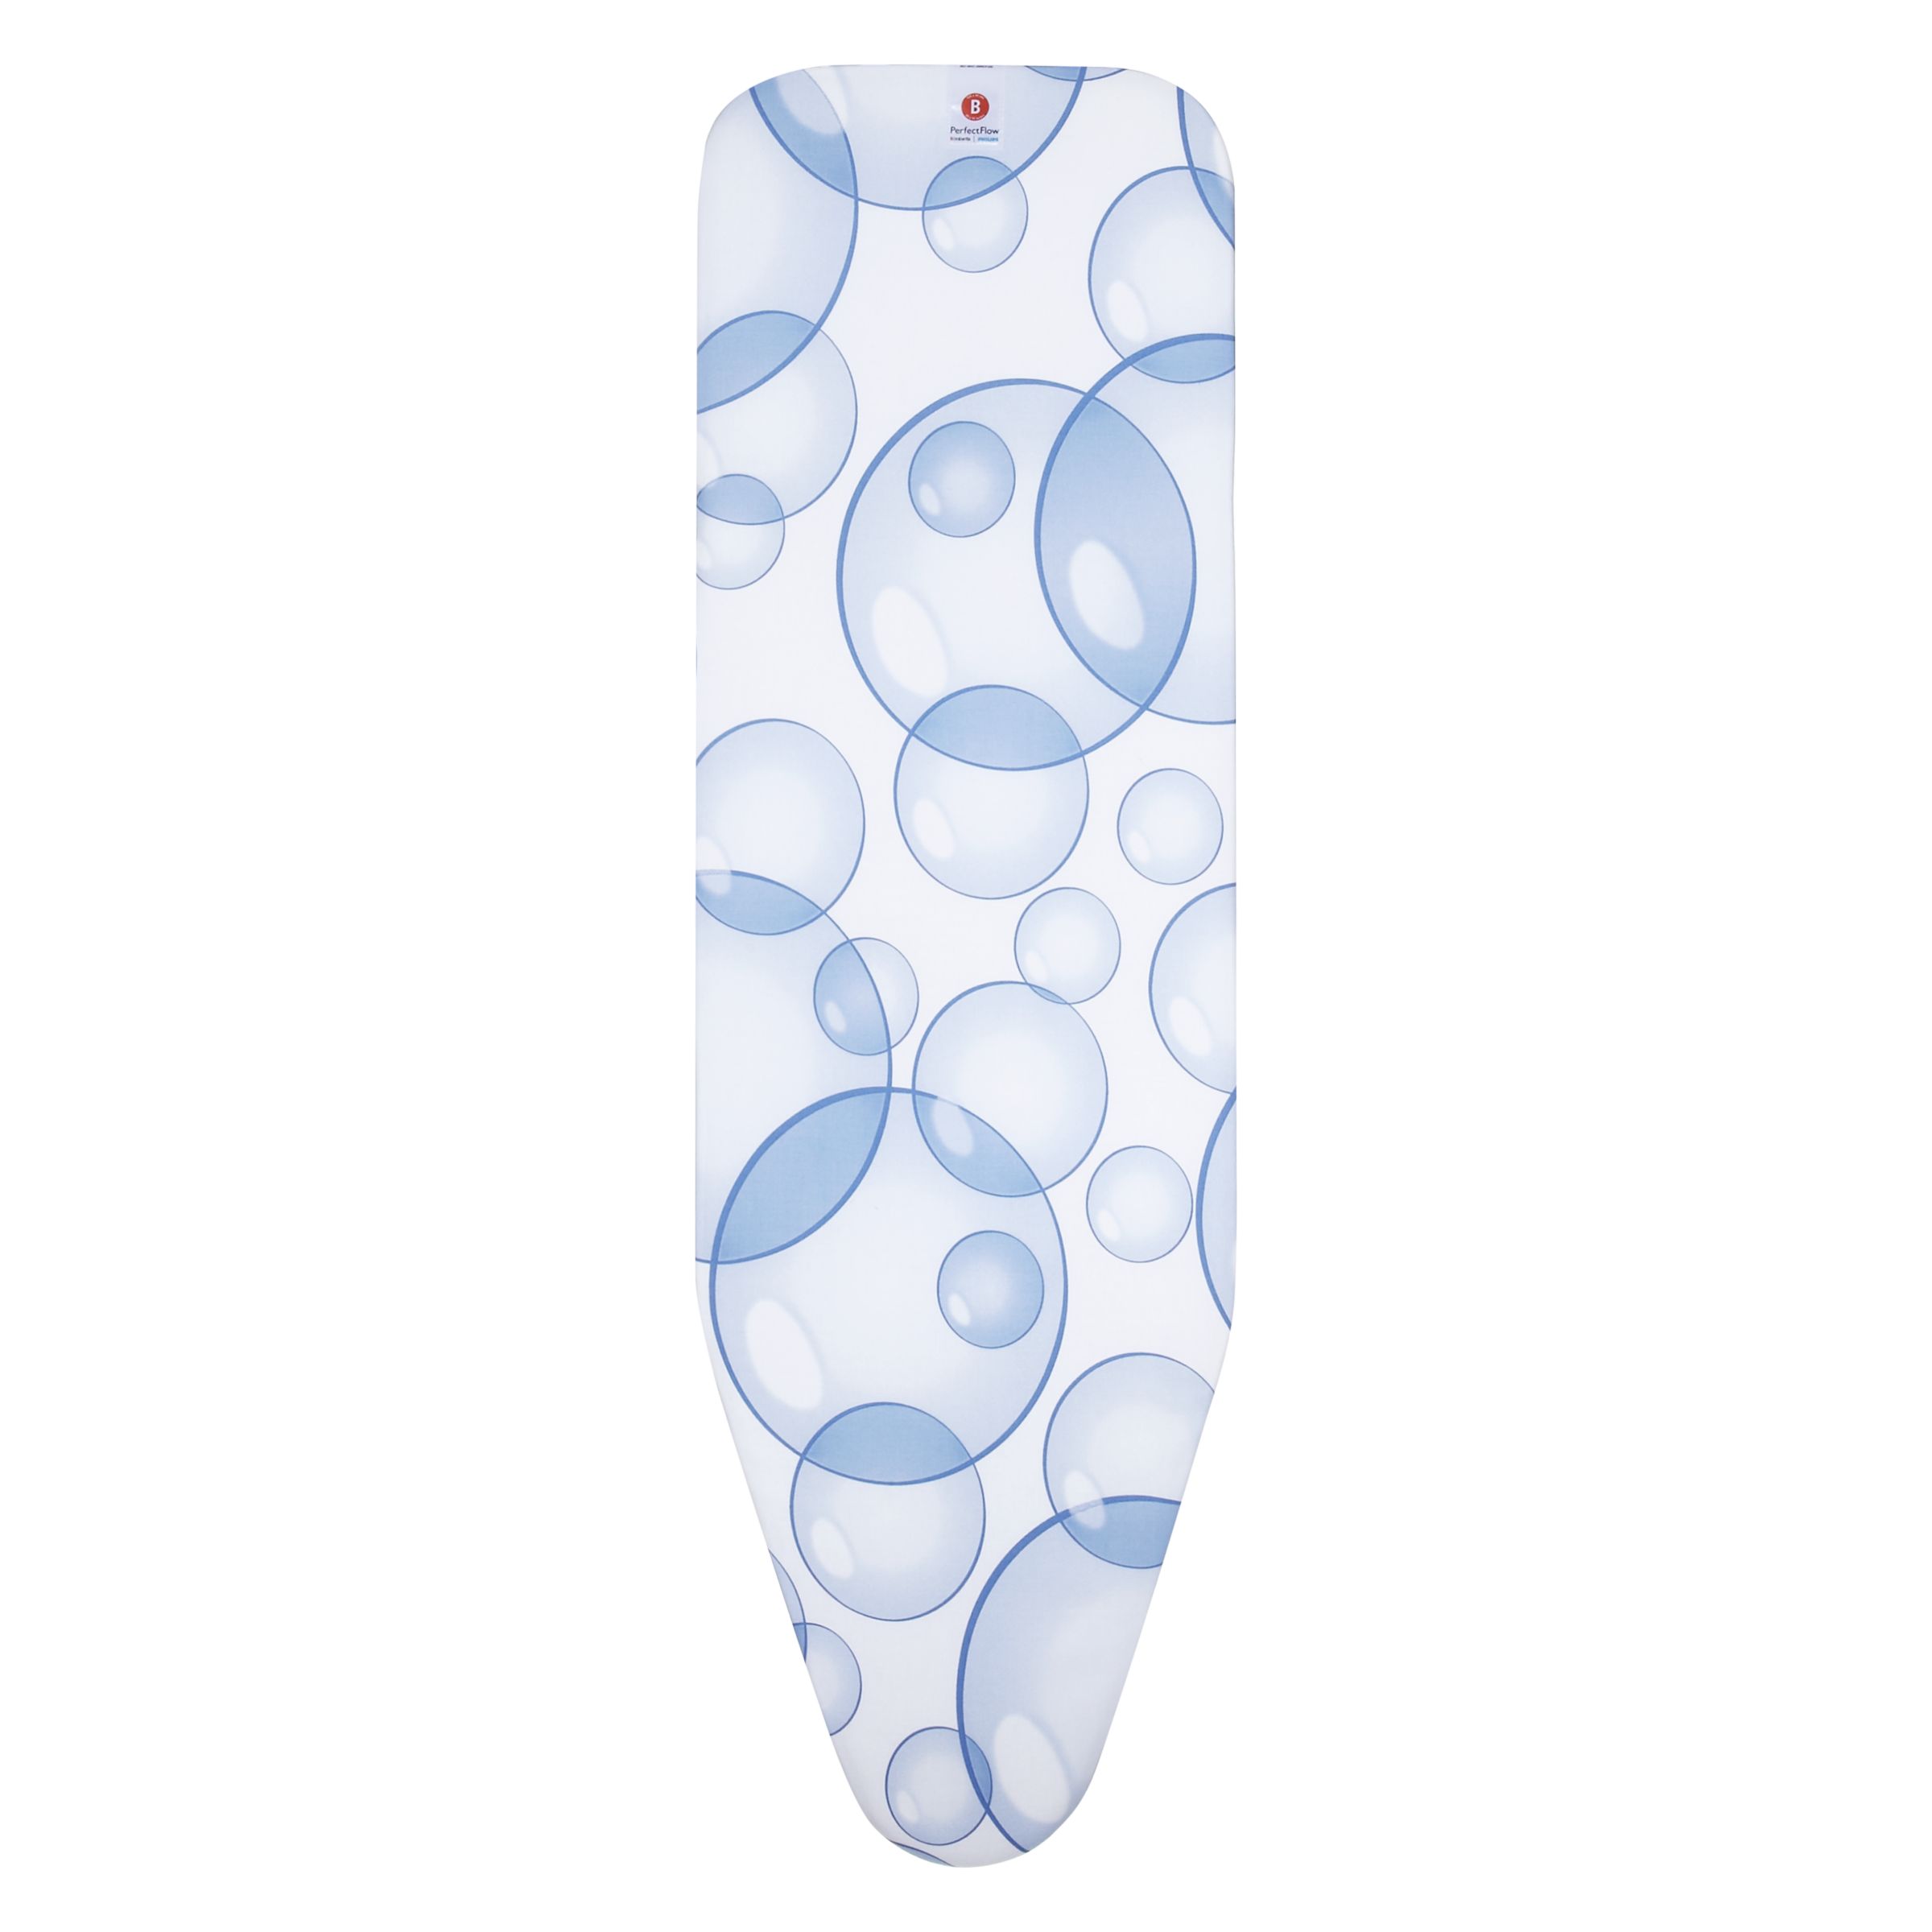 Brabantia Perfect Flow Ironing Board Cover